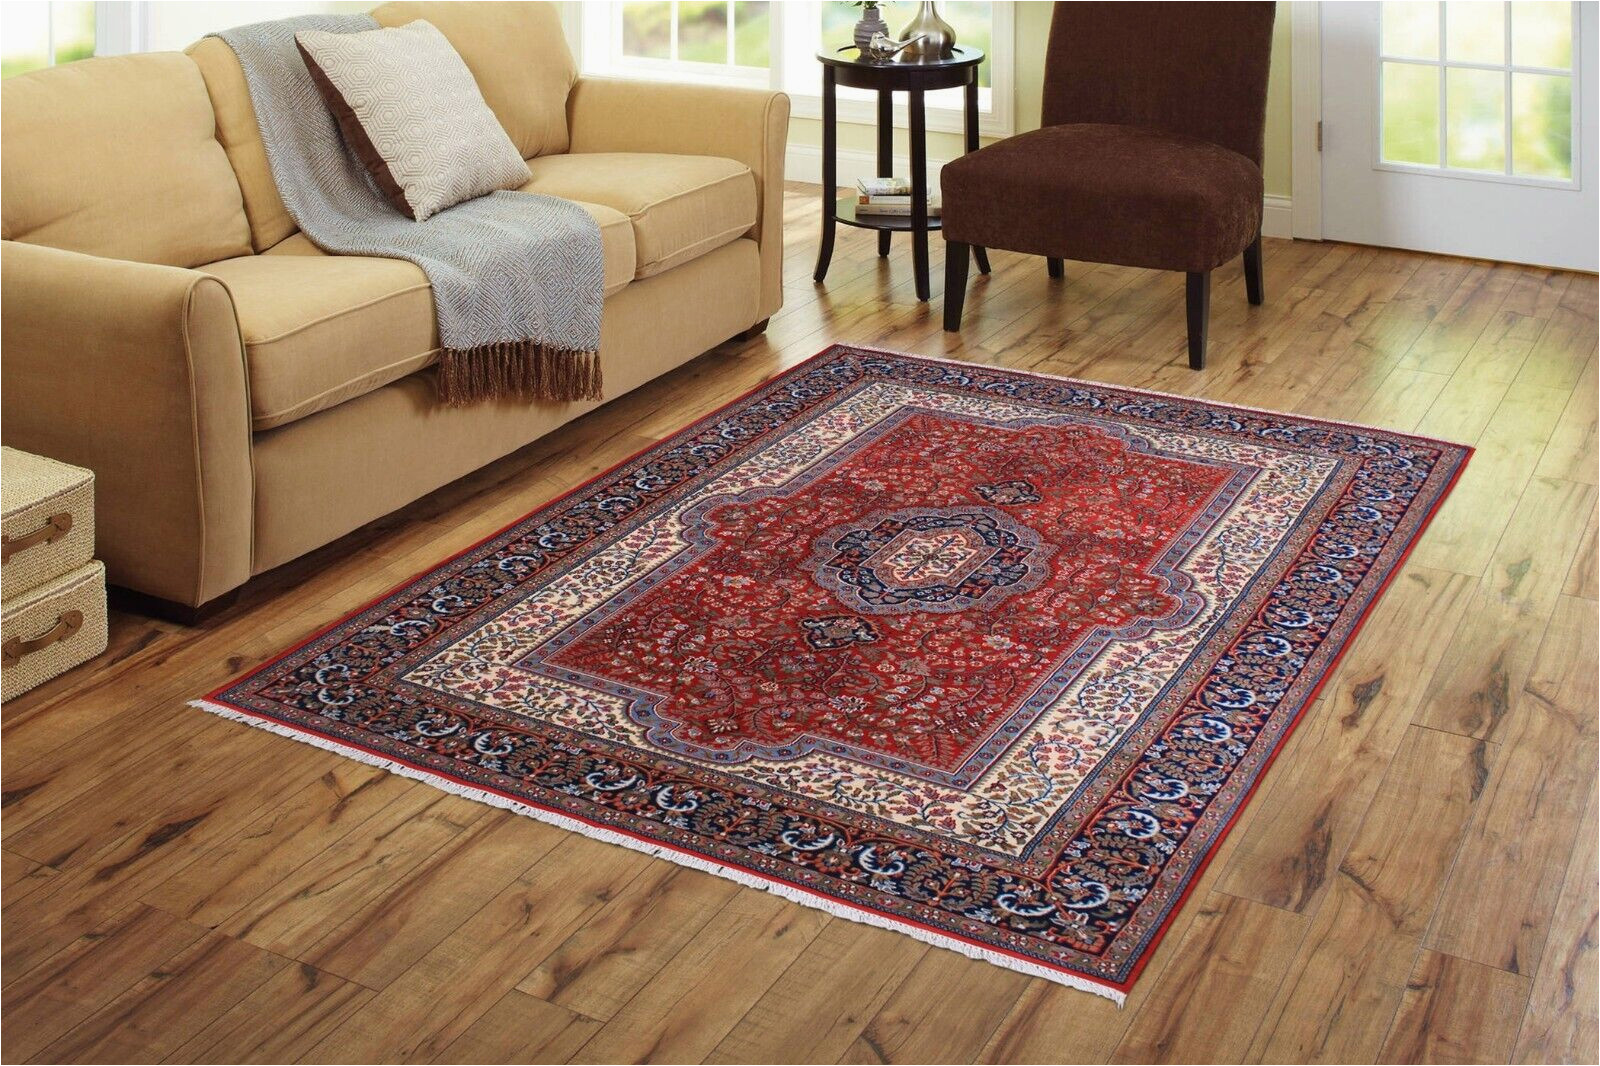 6×9 area Rugs for Dining Room Indian Handknotted Rug Decorative Wool area Rugs 6×9 Red Traditional Carpets